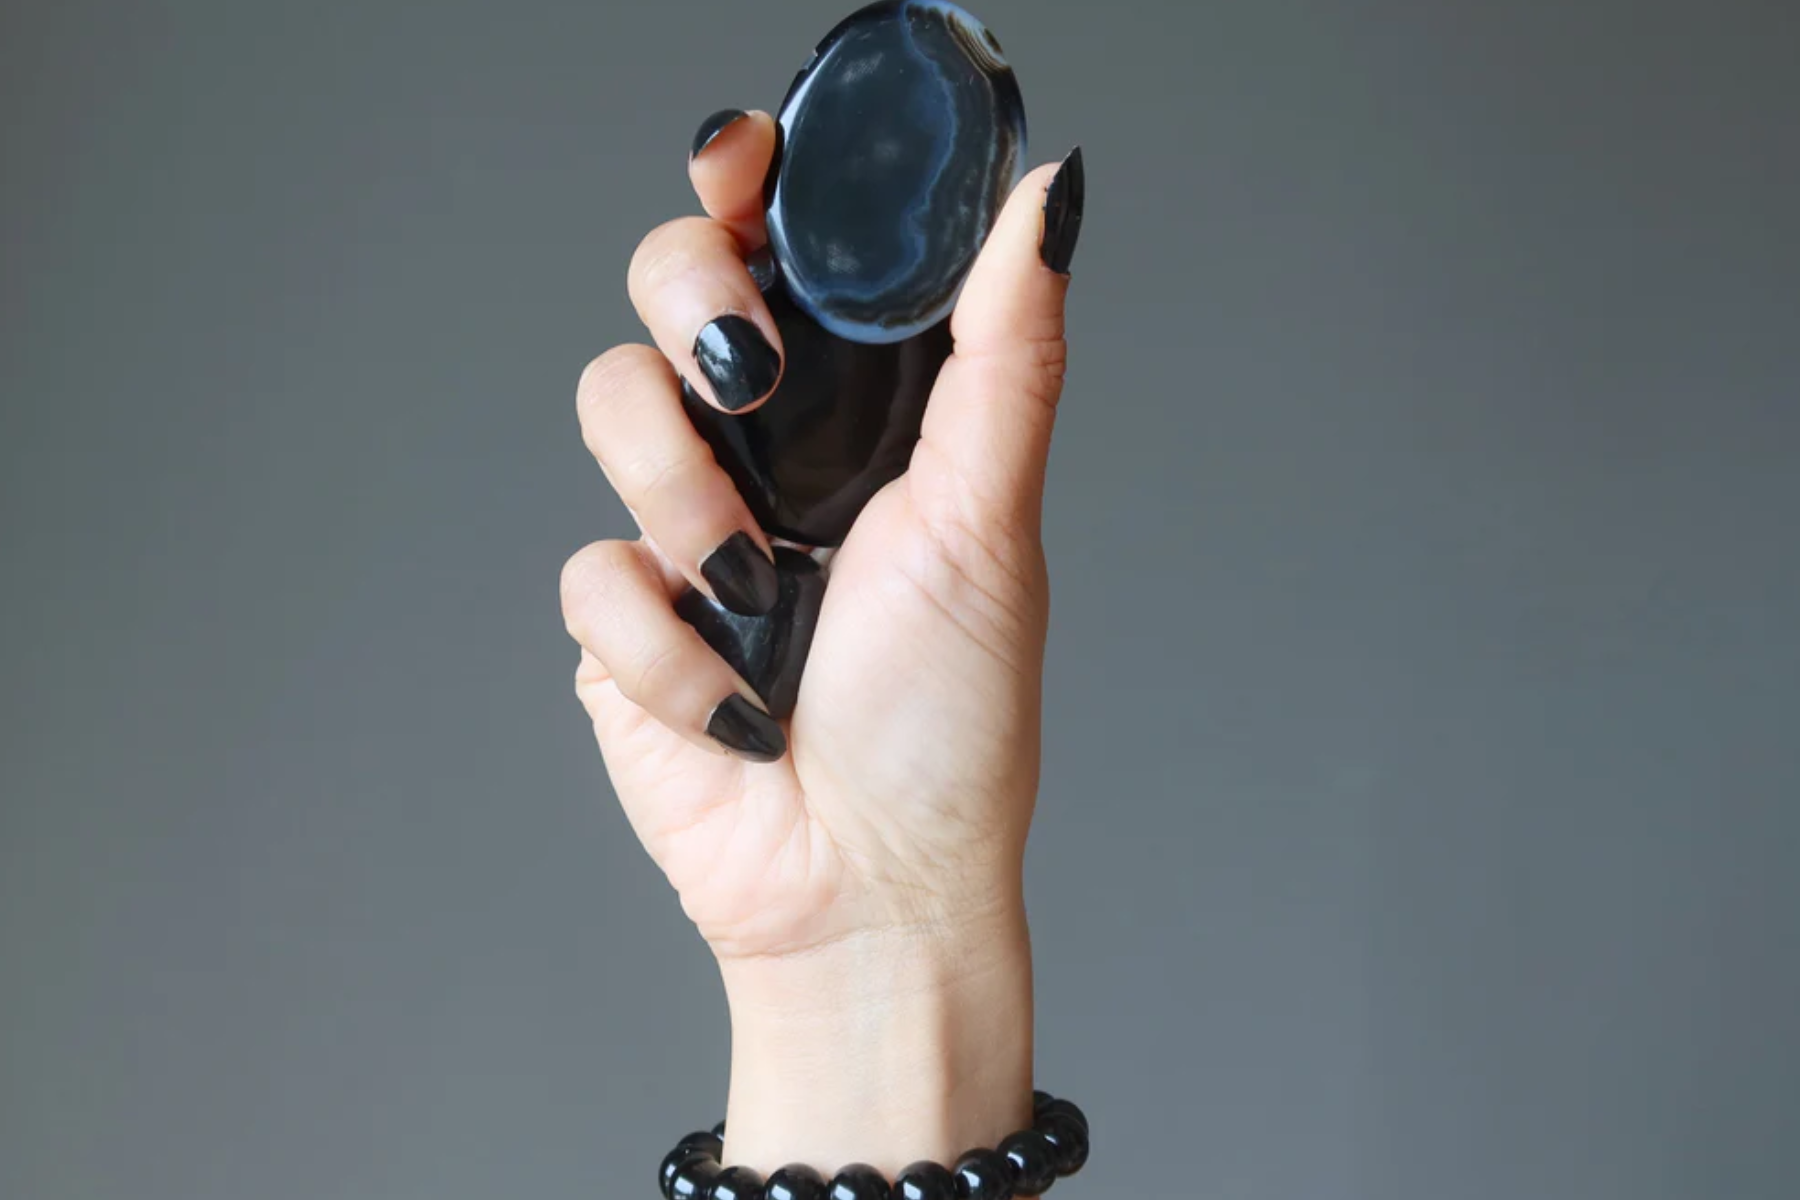 A woman's hand lifting three onyx stones on a gray setting